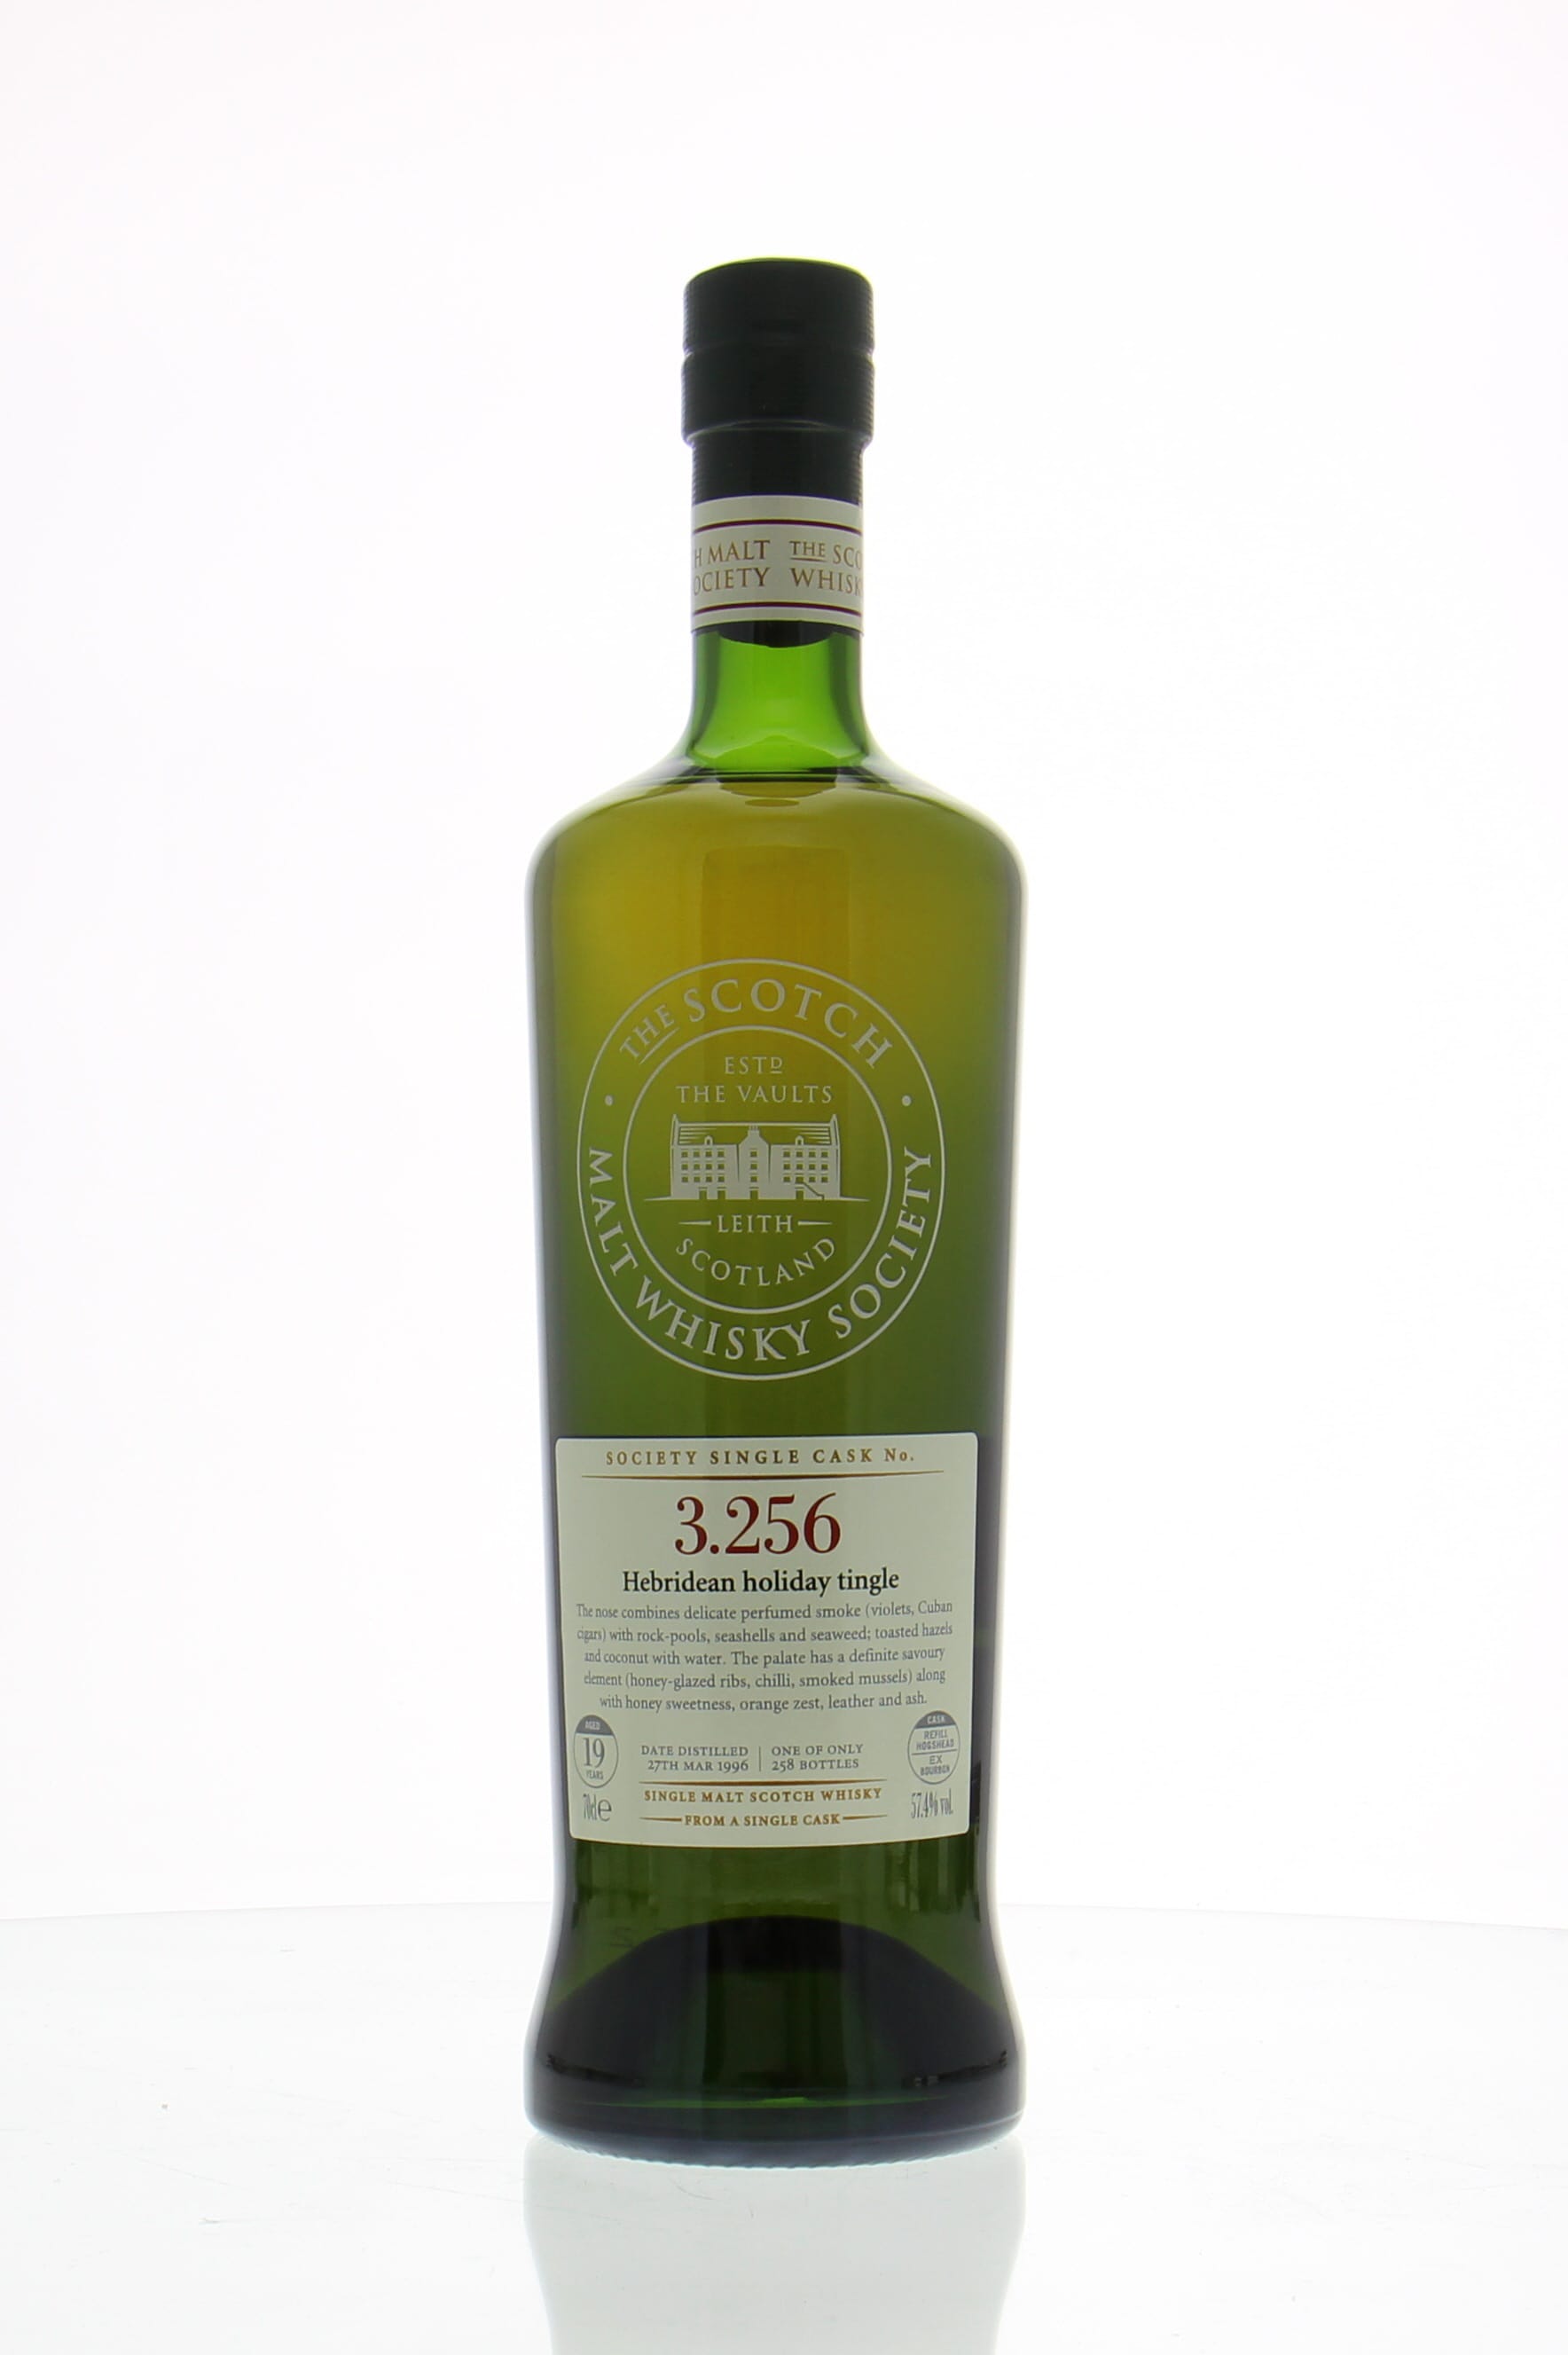 Bowmore - 19 Years Old SMWS 3.256 Hebridean holiday tingle  57.4% 1996